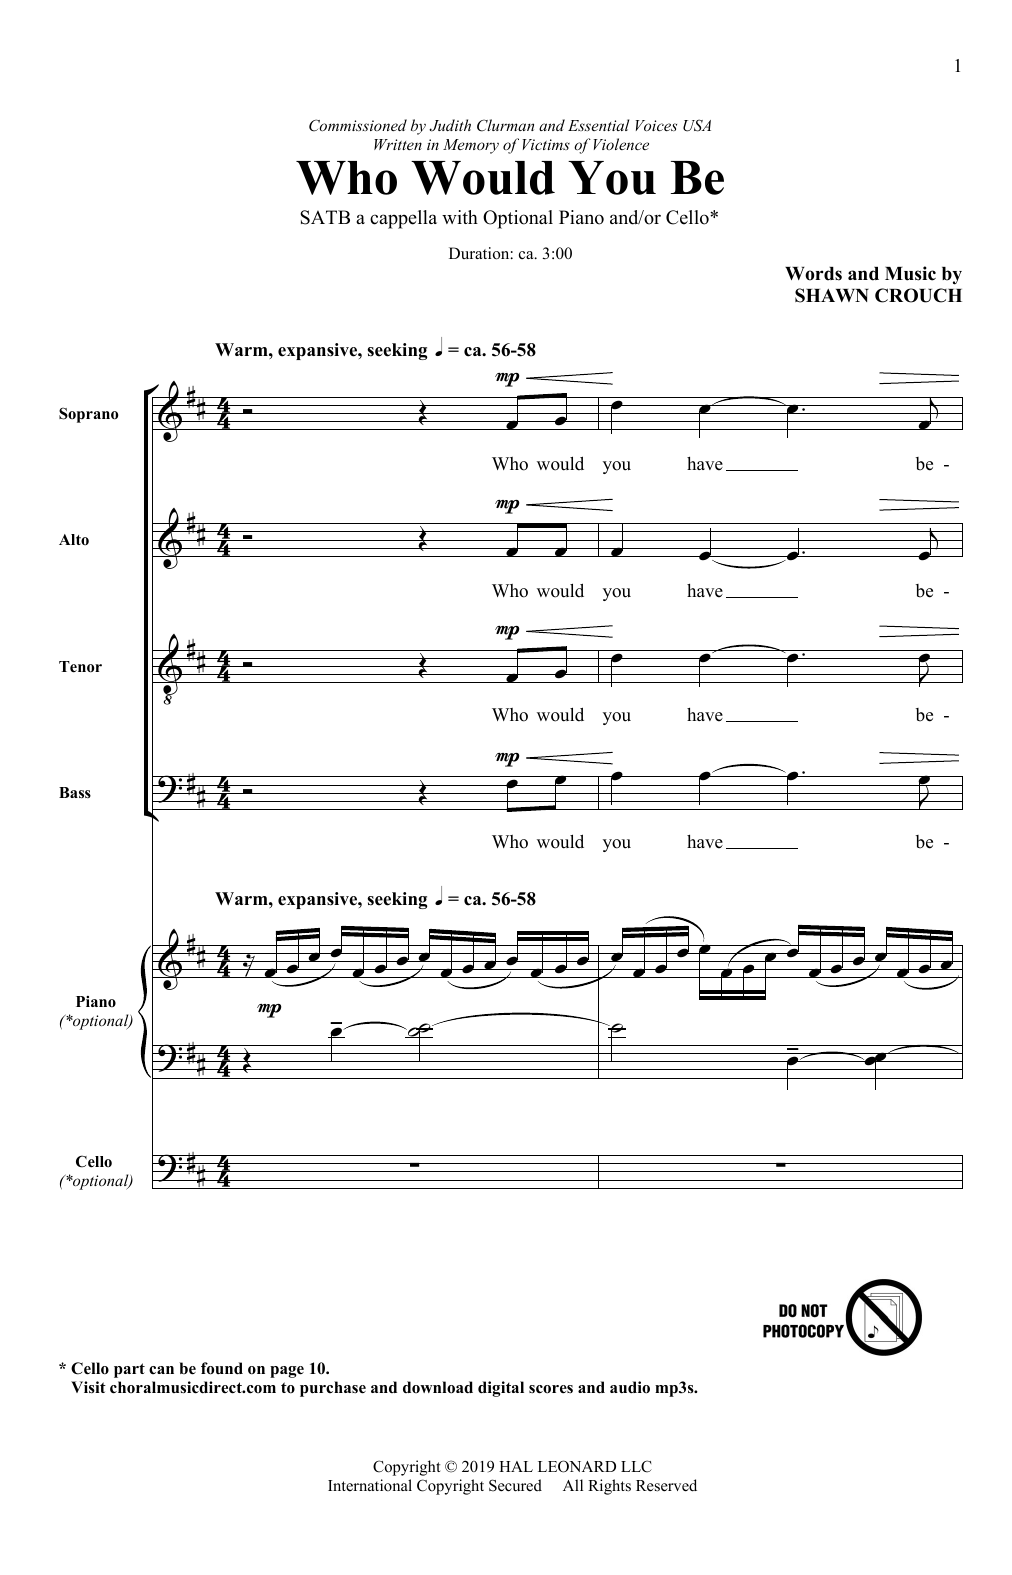 Download Shawn Crouch Who Would You Be? Sheet Music